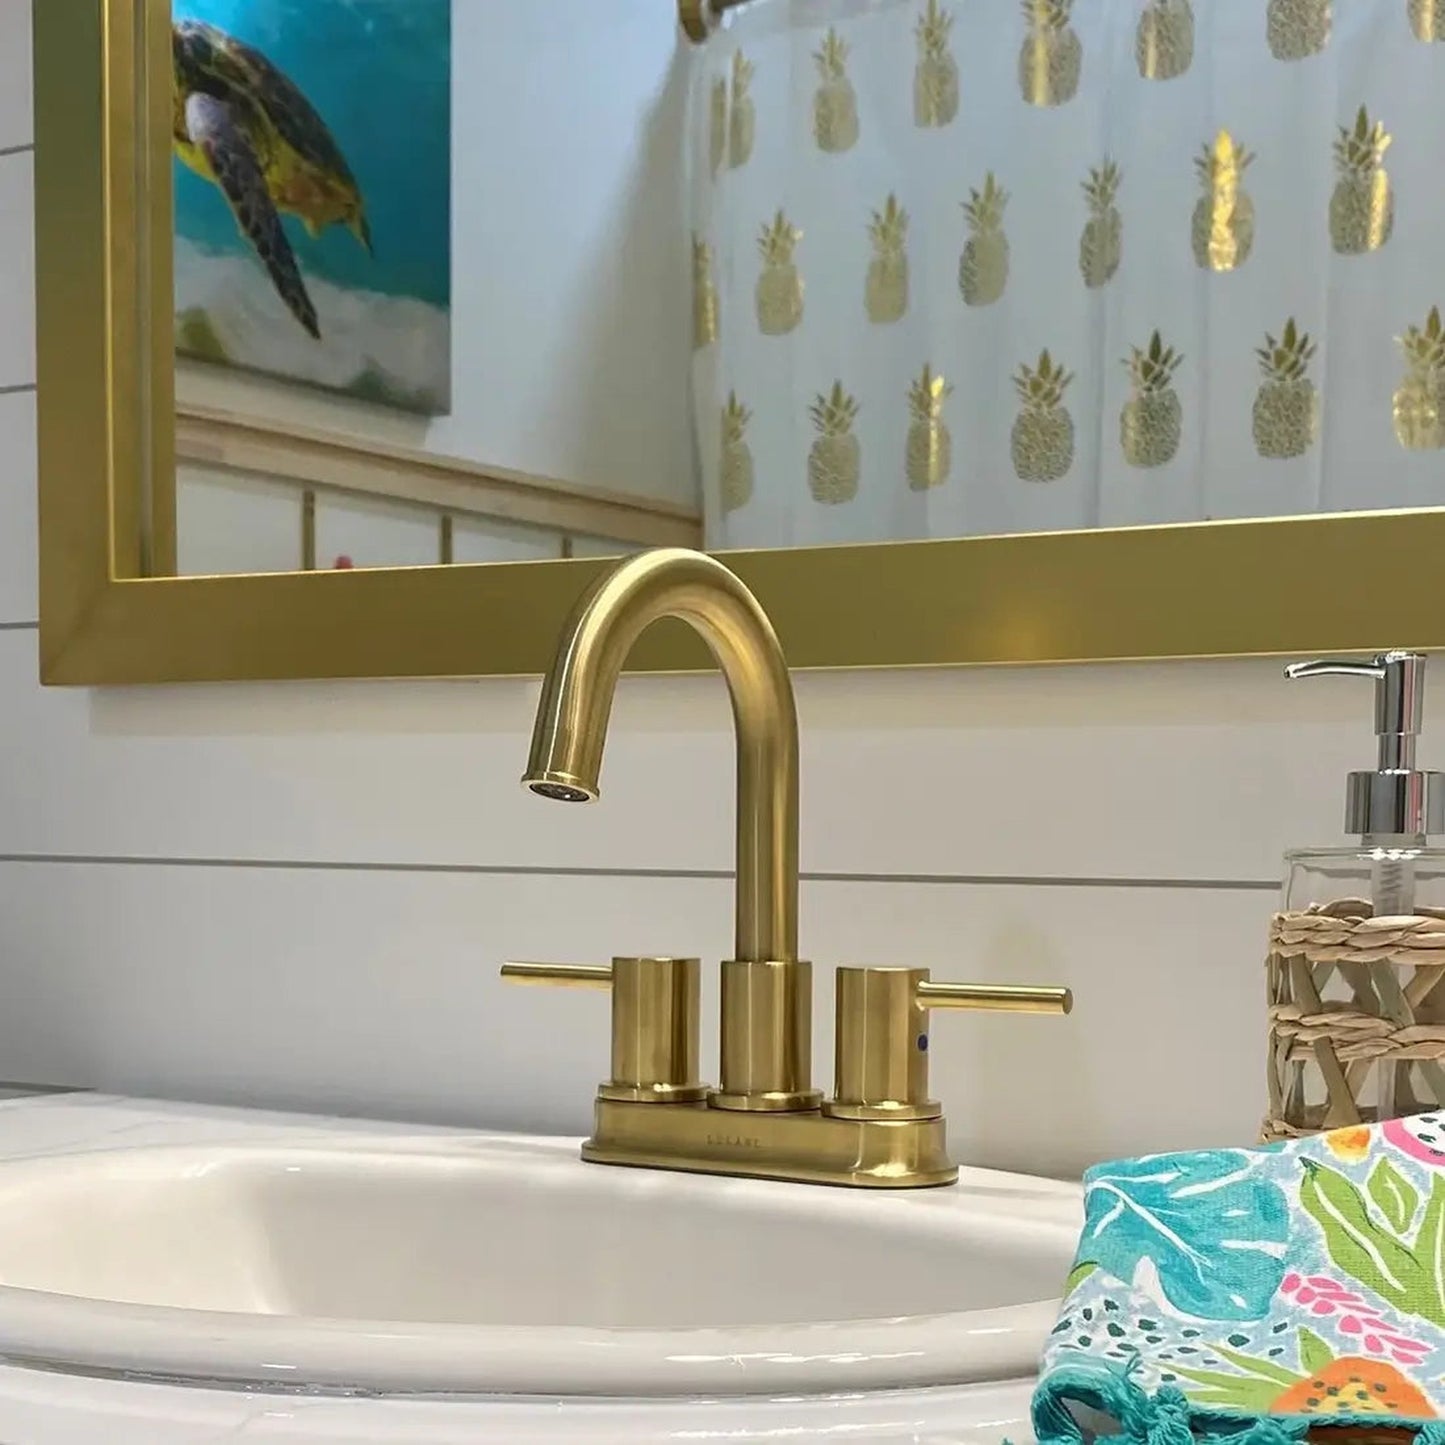 Lulani St. Lucia Champagne Gold 1.2 GPM Two Handle Centerset Faucet With Drain Assembly